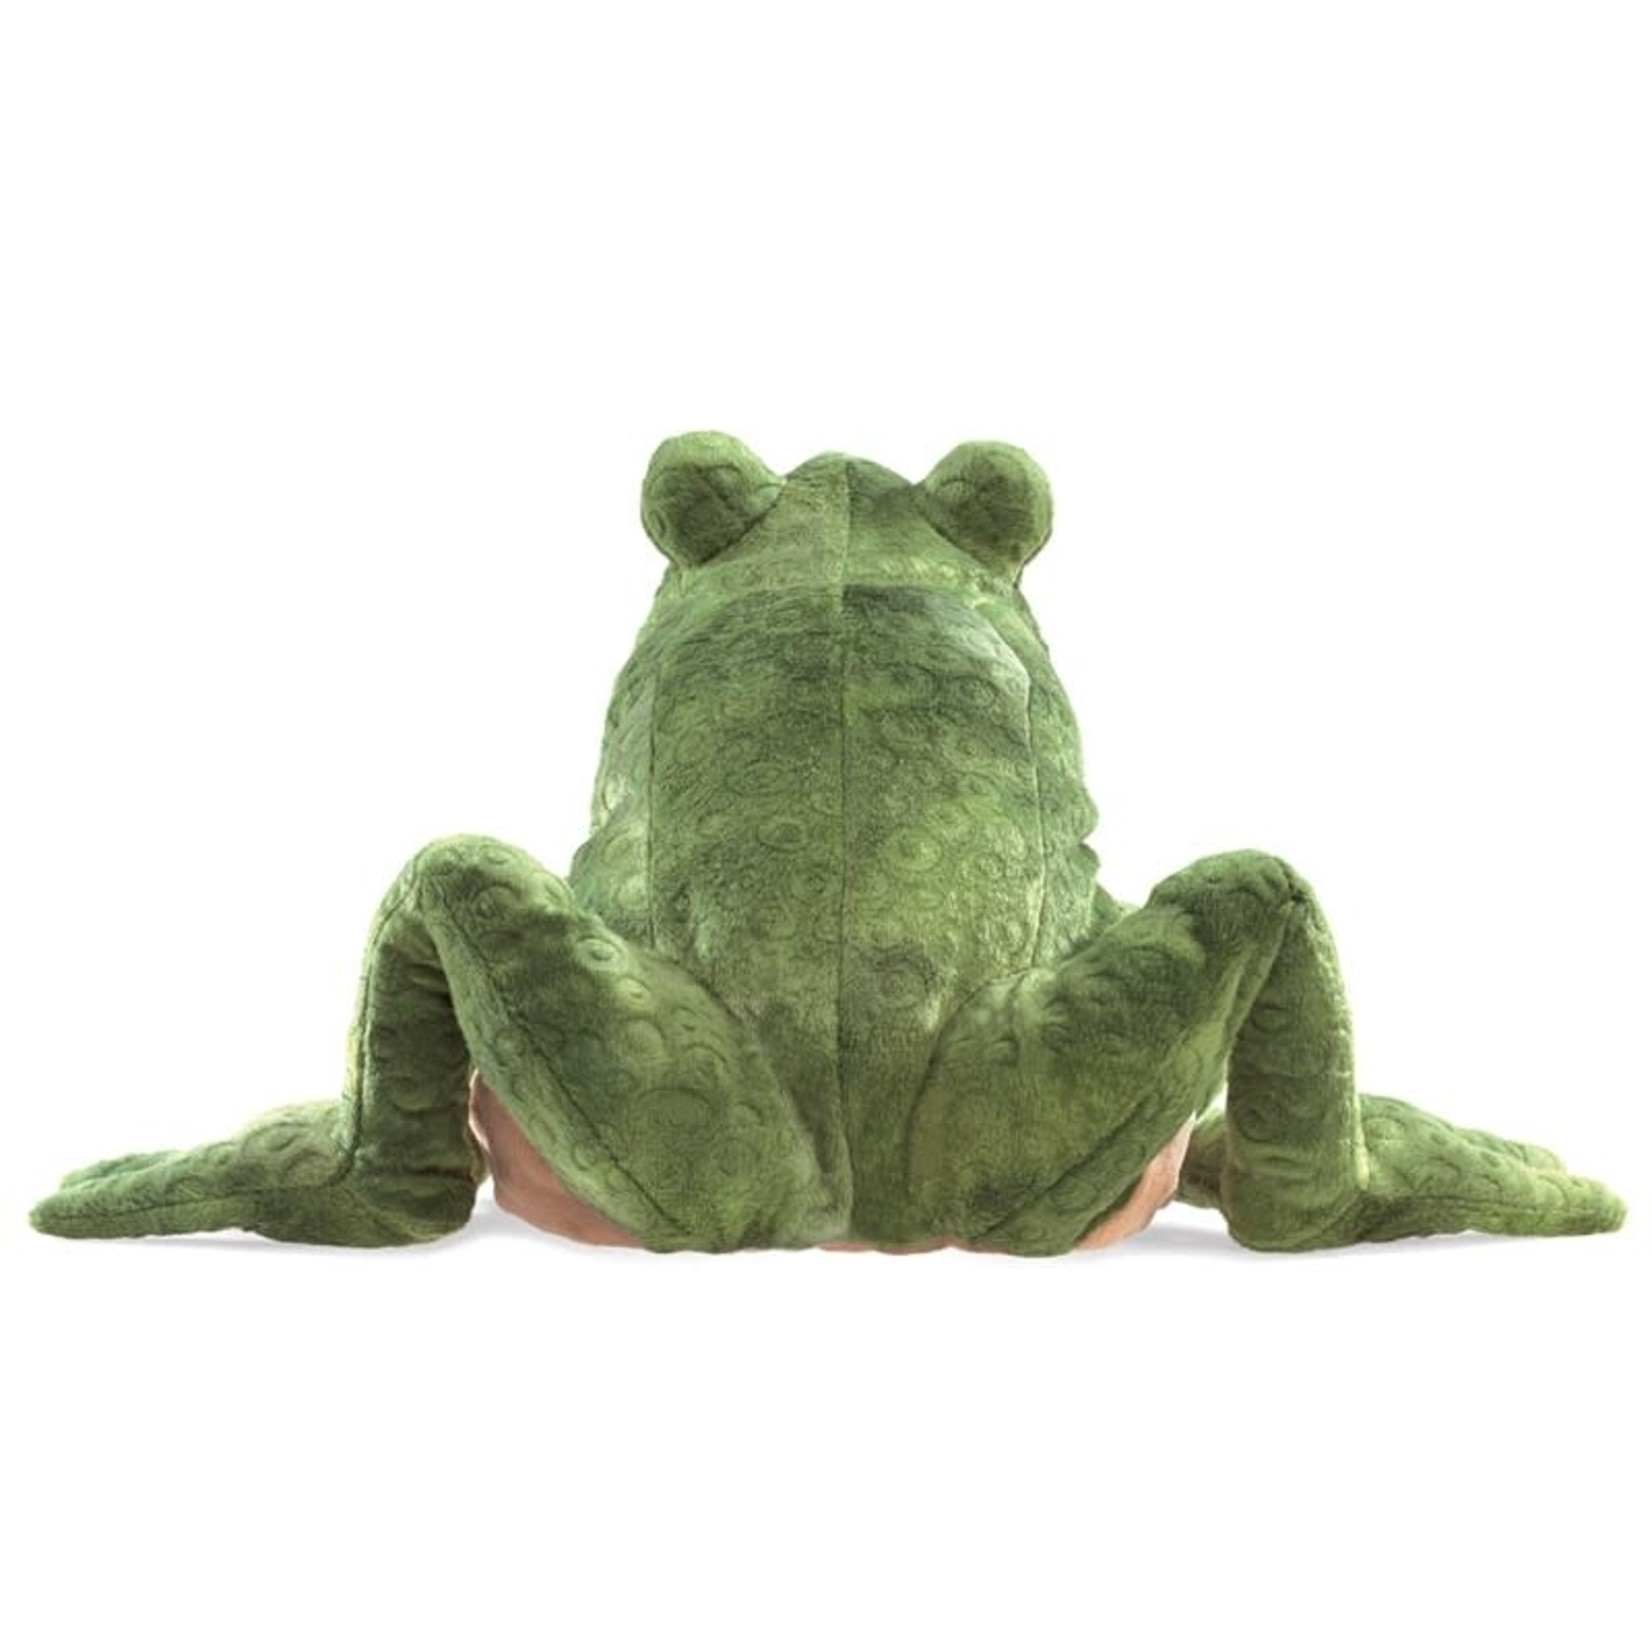 Toad Hand Puppet